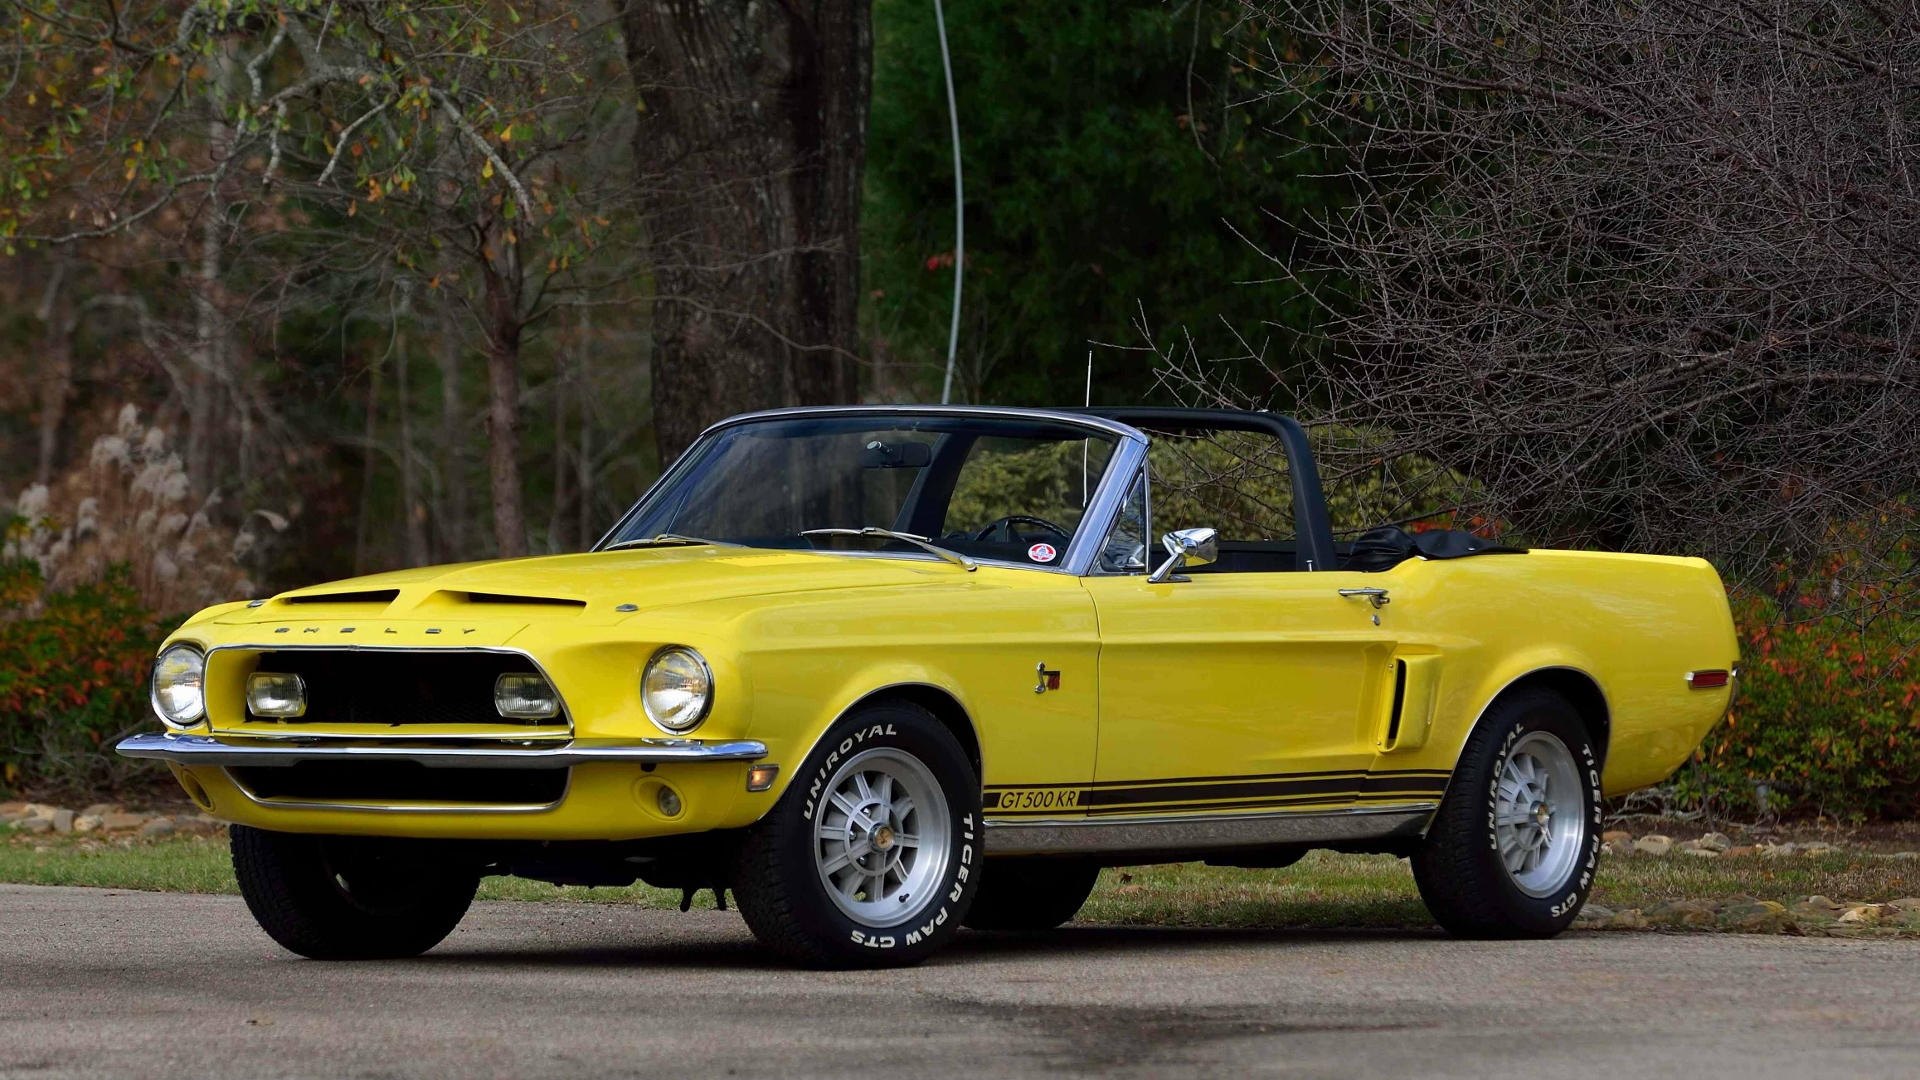 Jim McMurrey collection, 1968 Shelby GT500KR convertible